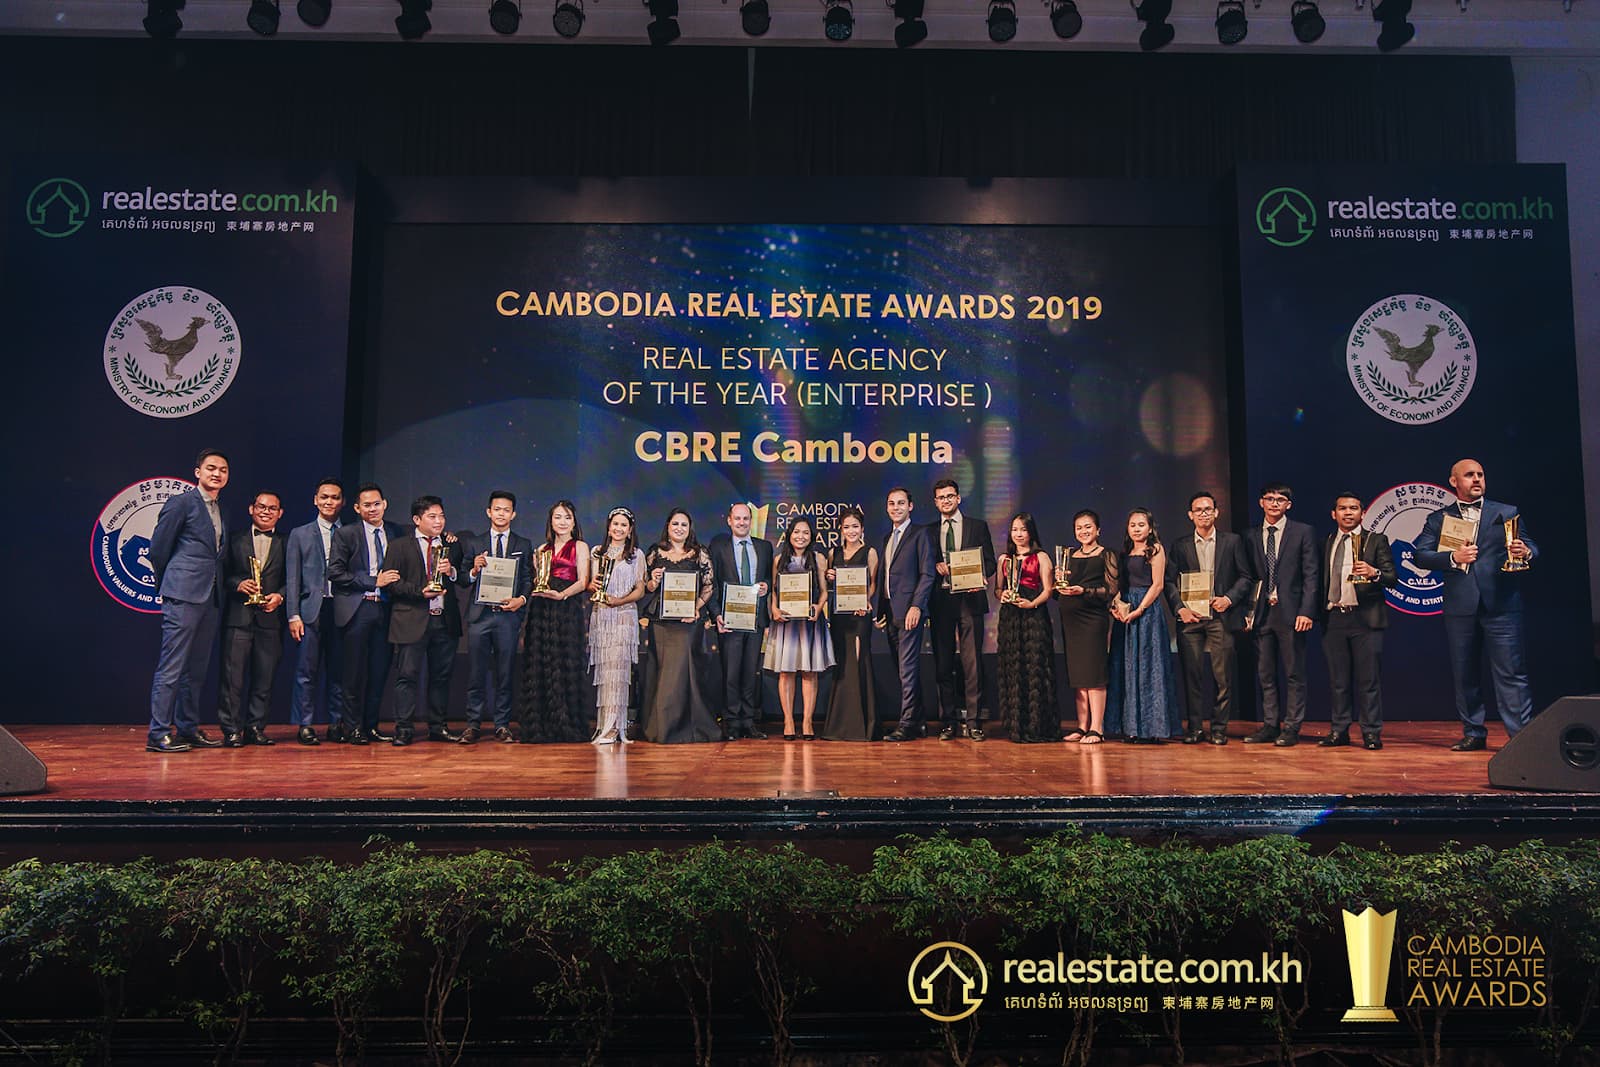 How to join the Cambodia Real Estate Awards 2021-22